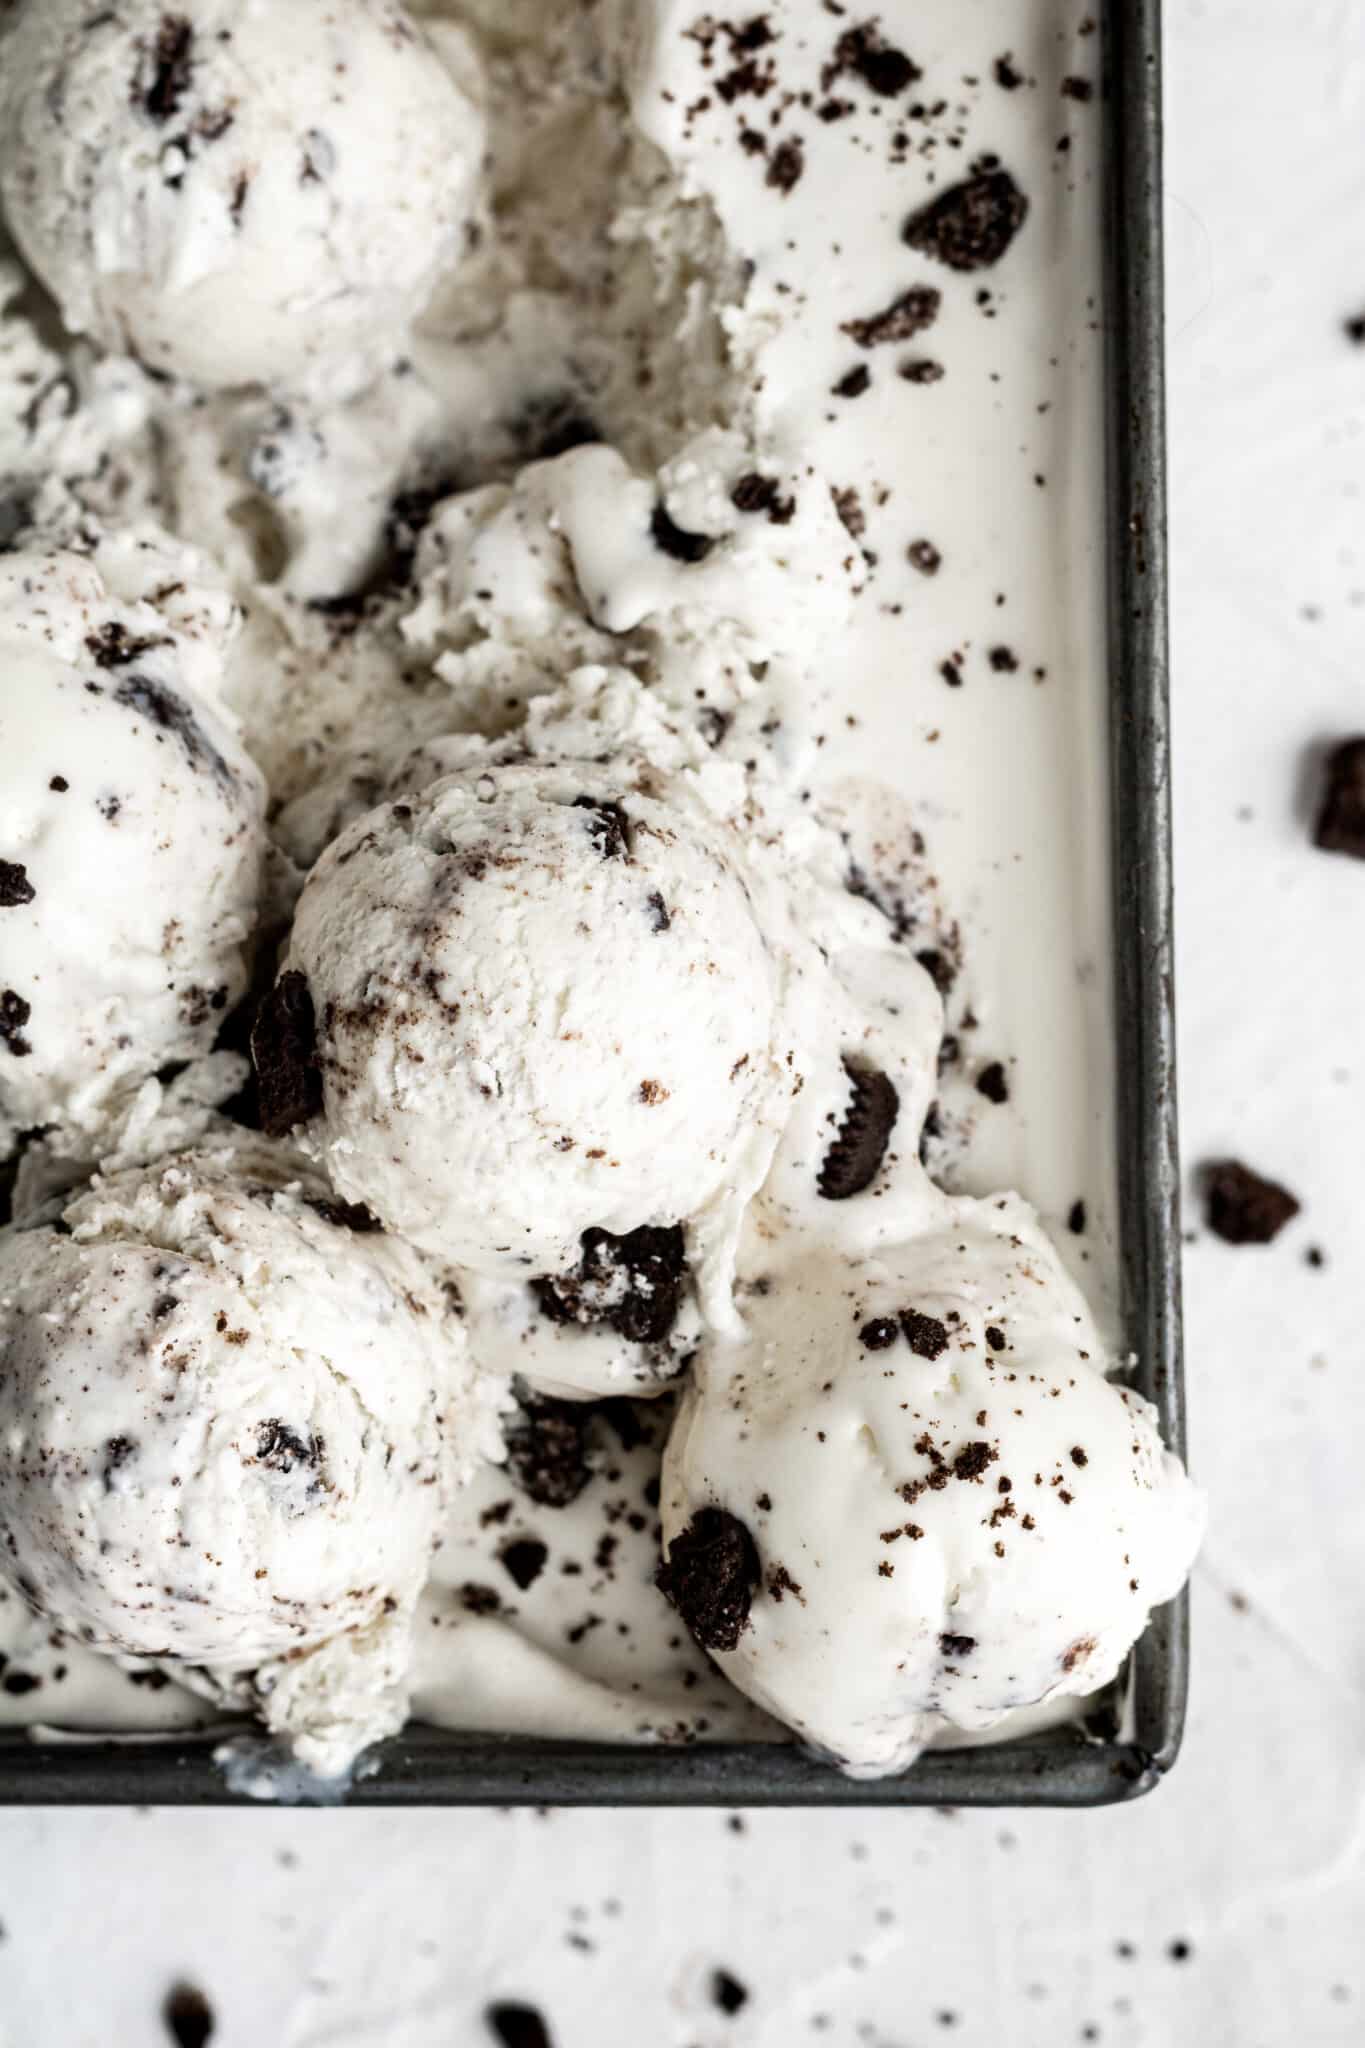 Cookies and Cream Ice Cream | Backpack